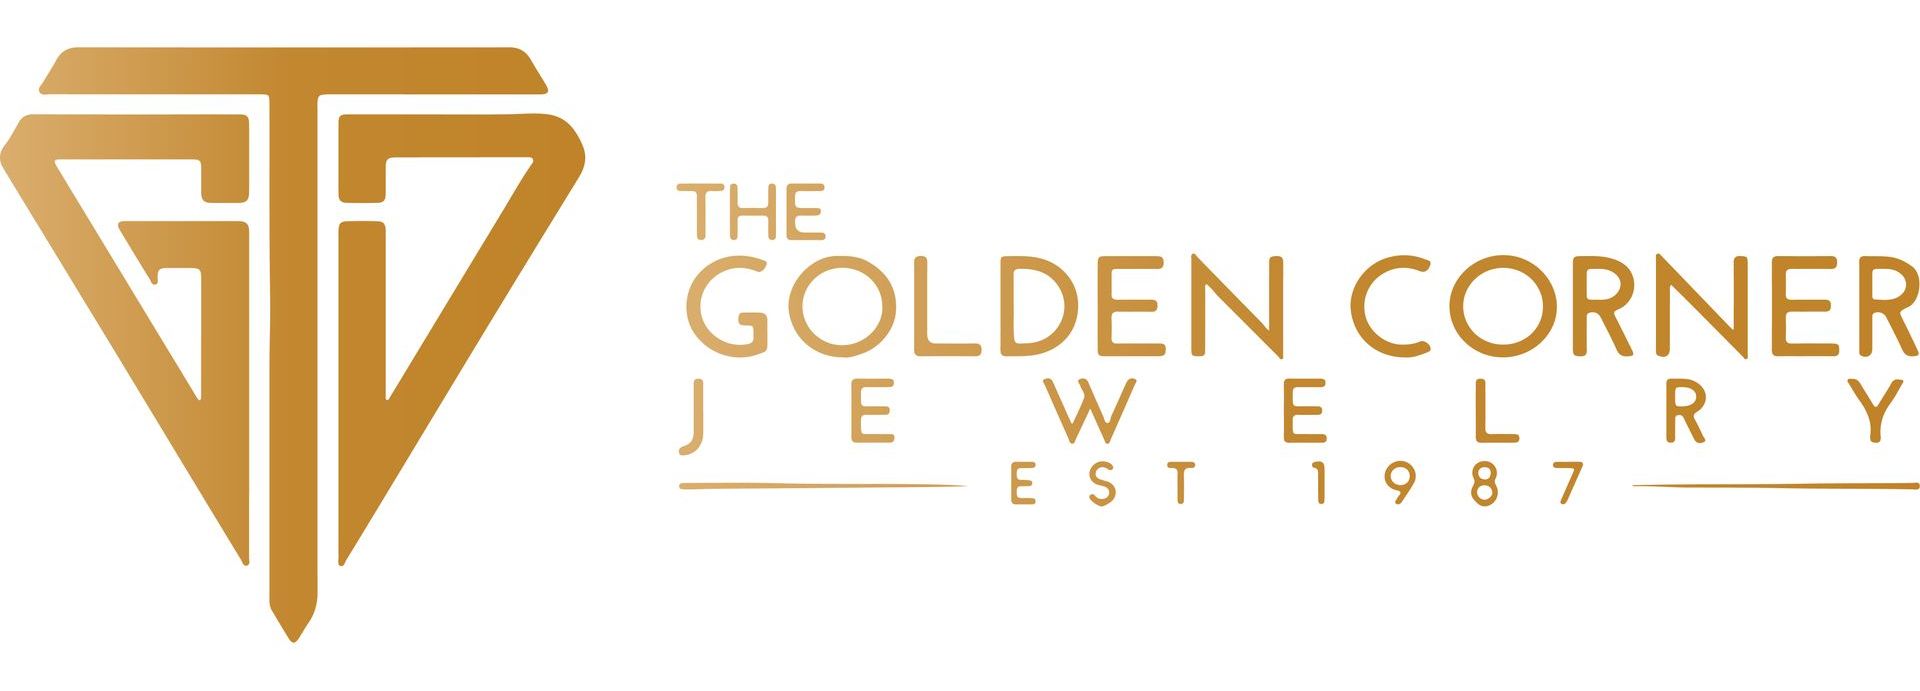 The logo for the golden corner jewelry is a gold diamond.